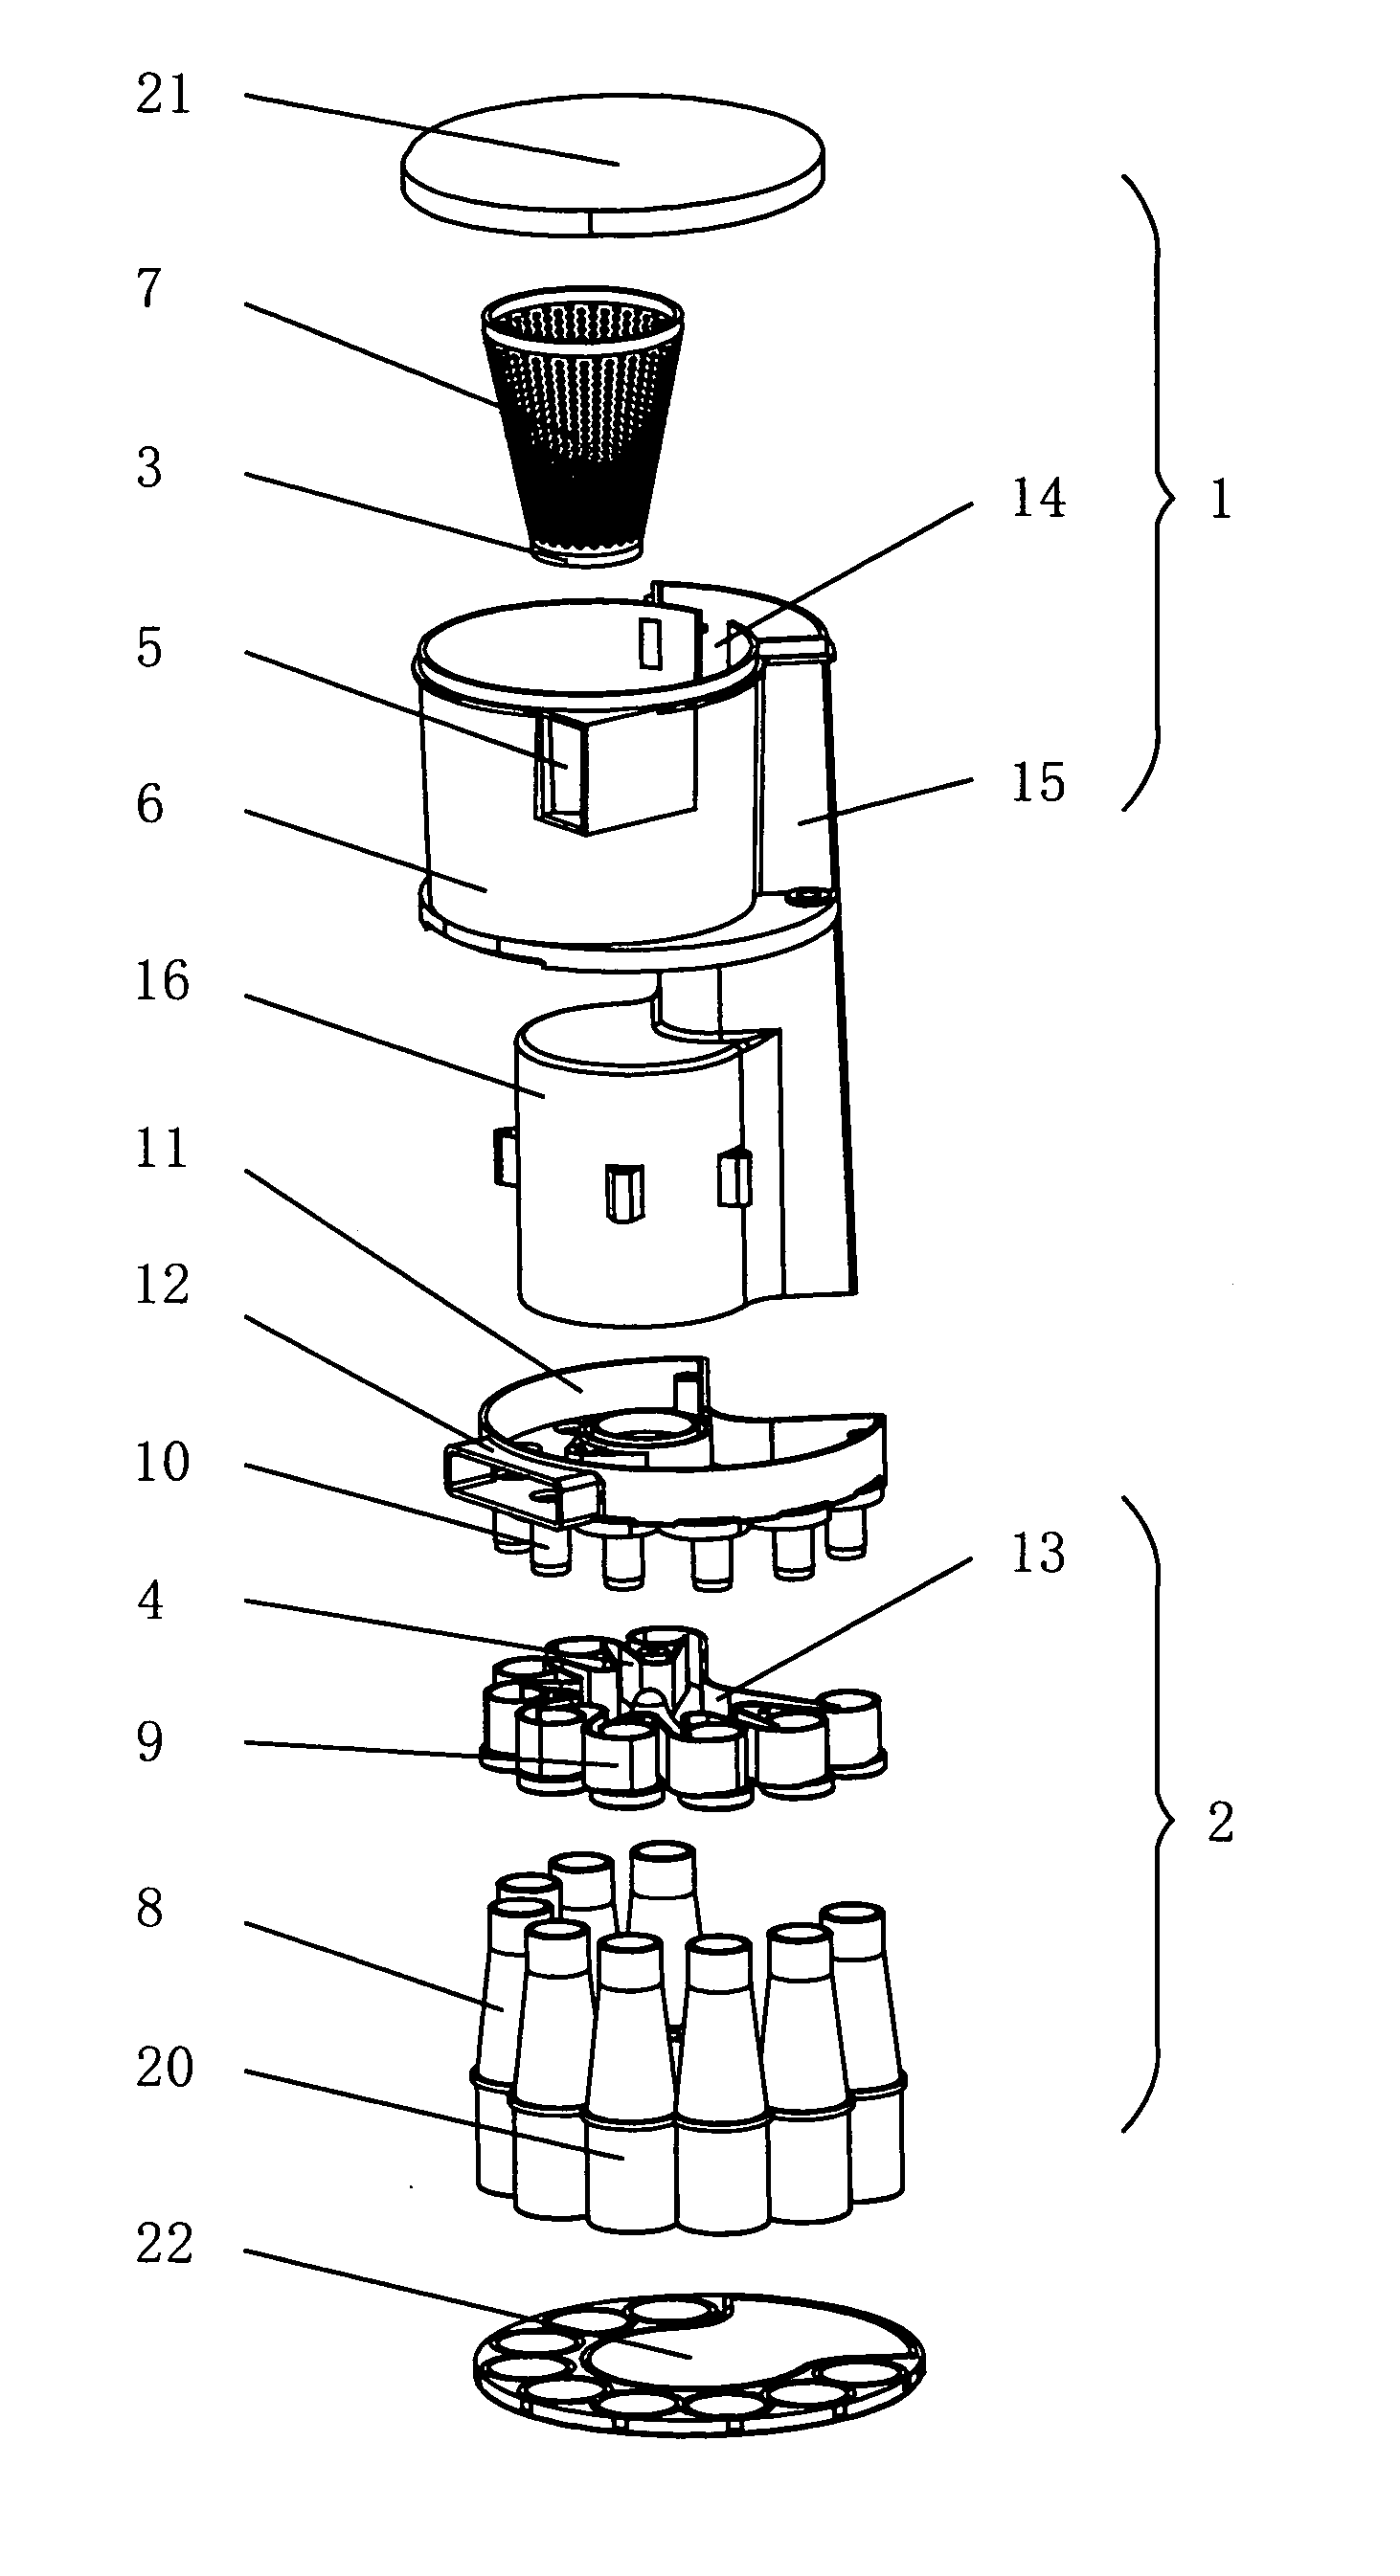 Subsection dedusting device for a vacuum cleaner